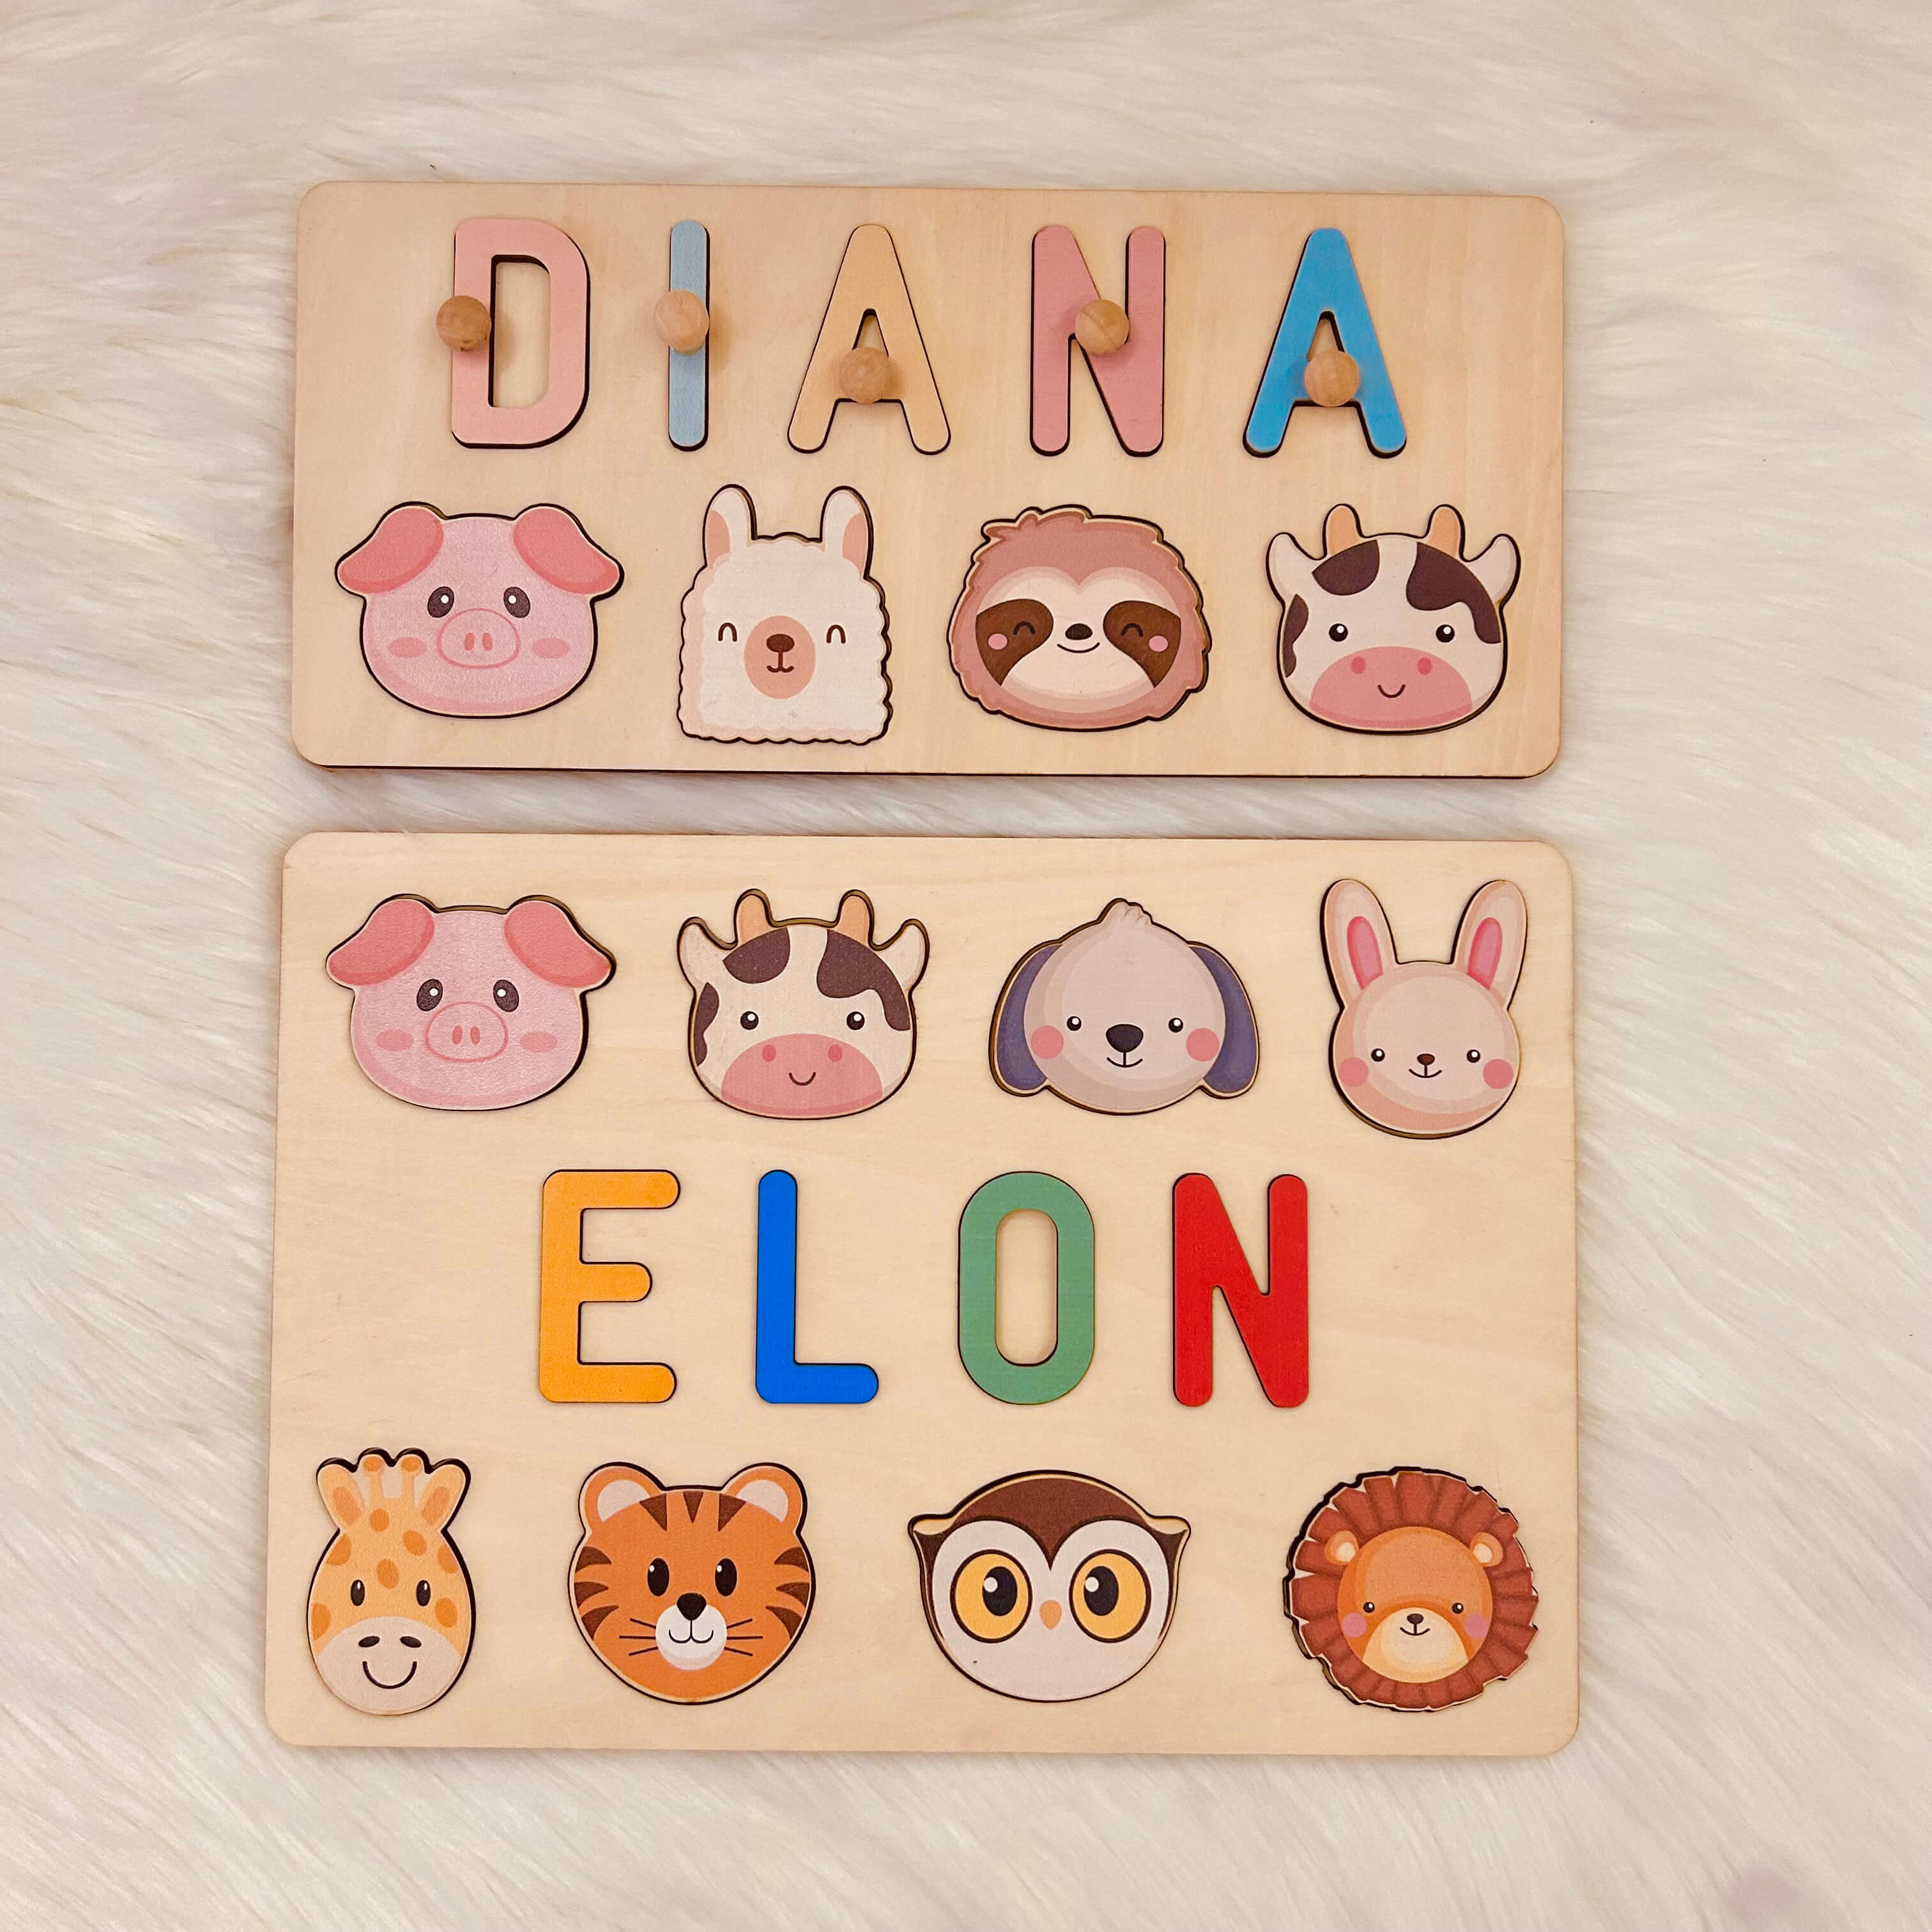 Personalized Wooden Baby Name Puzzle with Animals Product Name: Personalized Wooden Baby Name Puzzle with Animals Material: Eco-Friendly Plywood BasswoodLetters Available: Up to 10Engraving Messages: AvailableNon-Toxic: YesNon-Harmful: Yes Color: Pastel-b